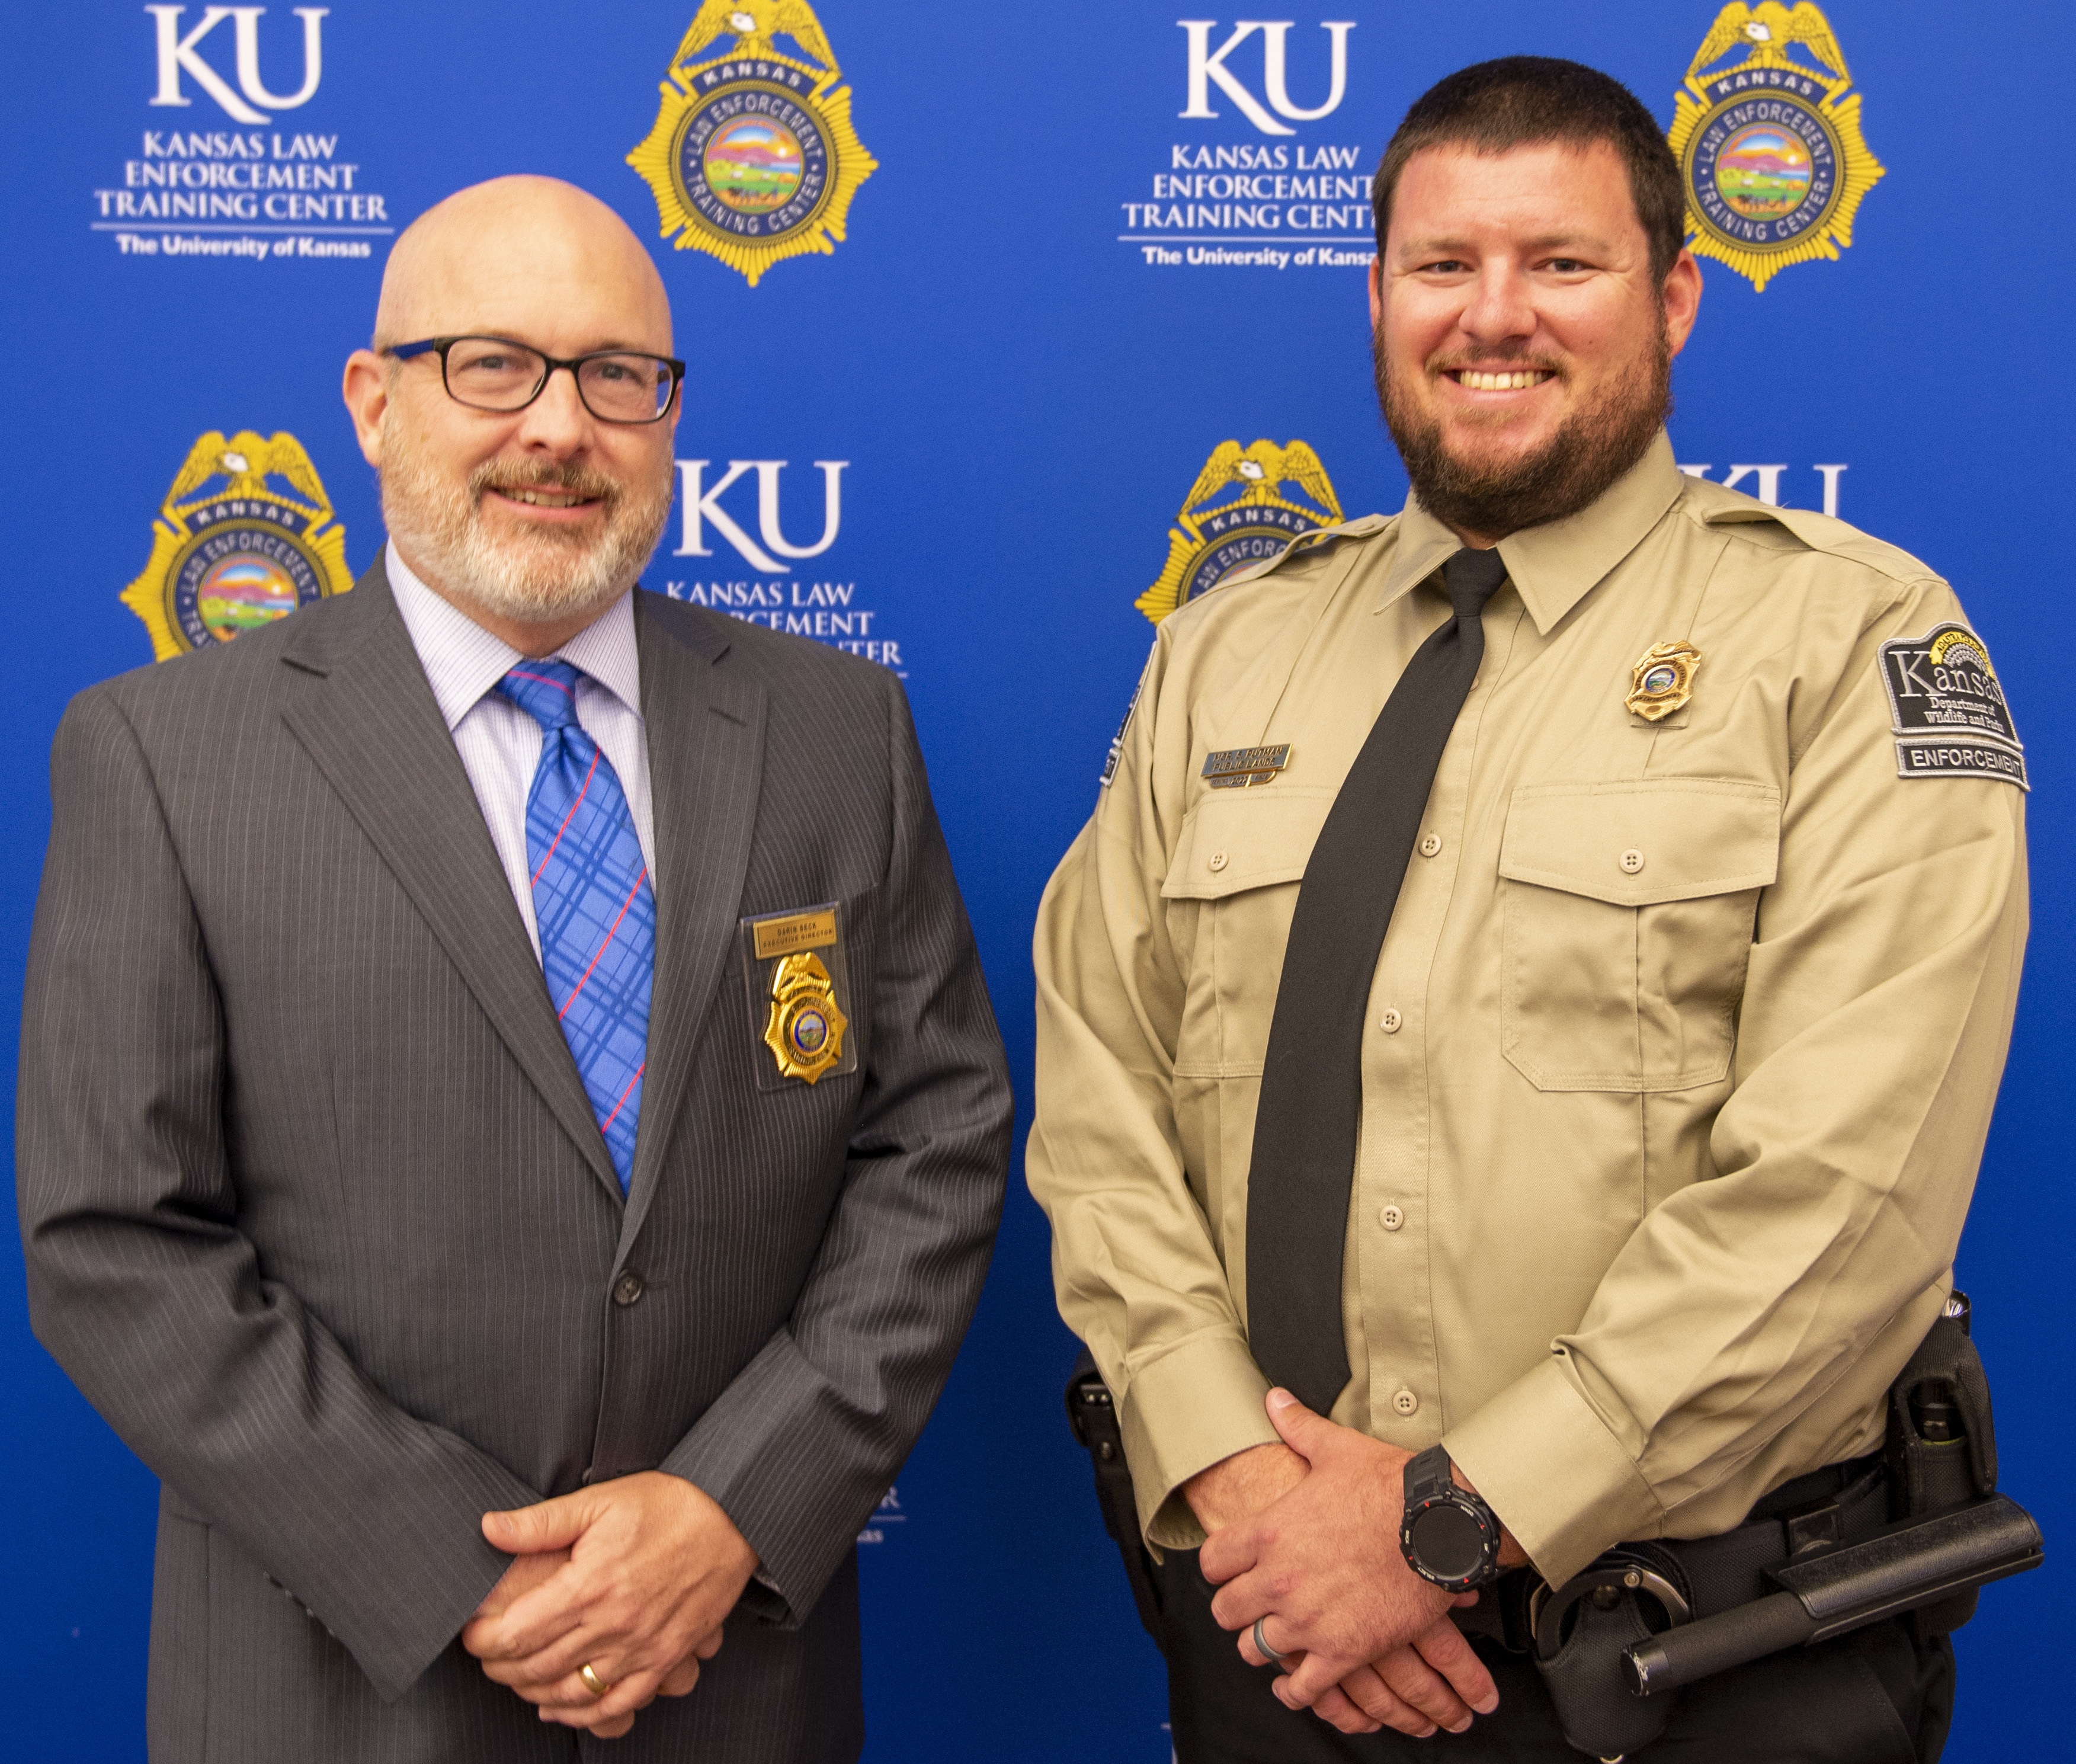 "KLETC Executive Director Darin Beck stands with the class president of the 296th basic training class, Officer Spencer Putman"